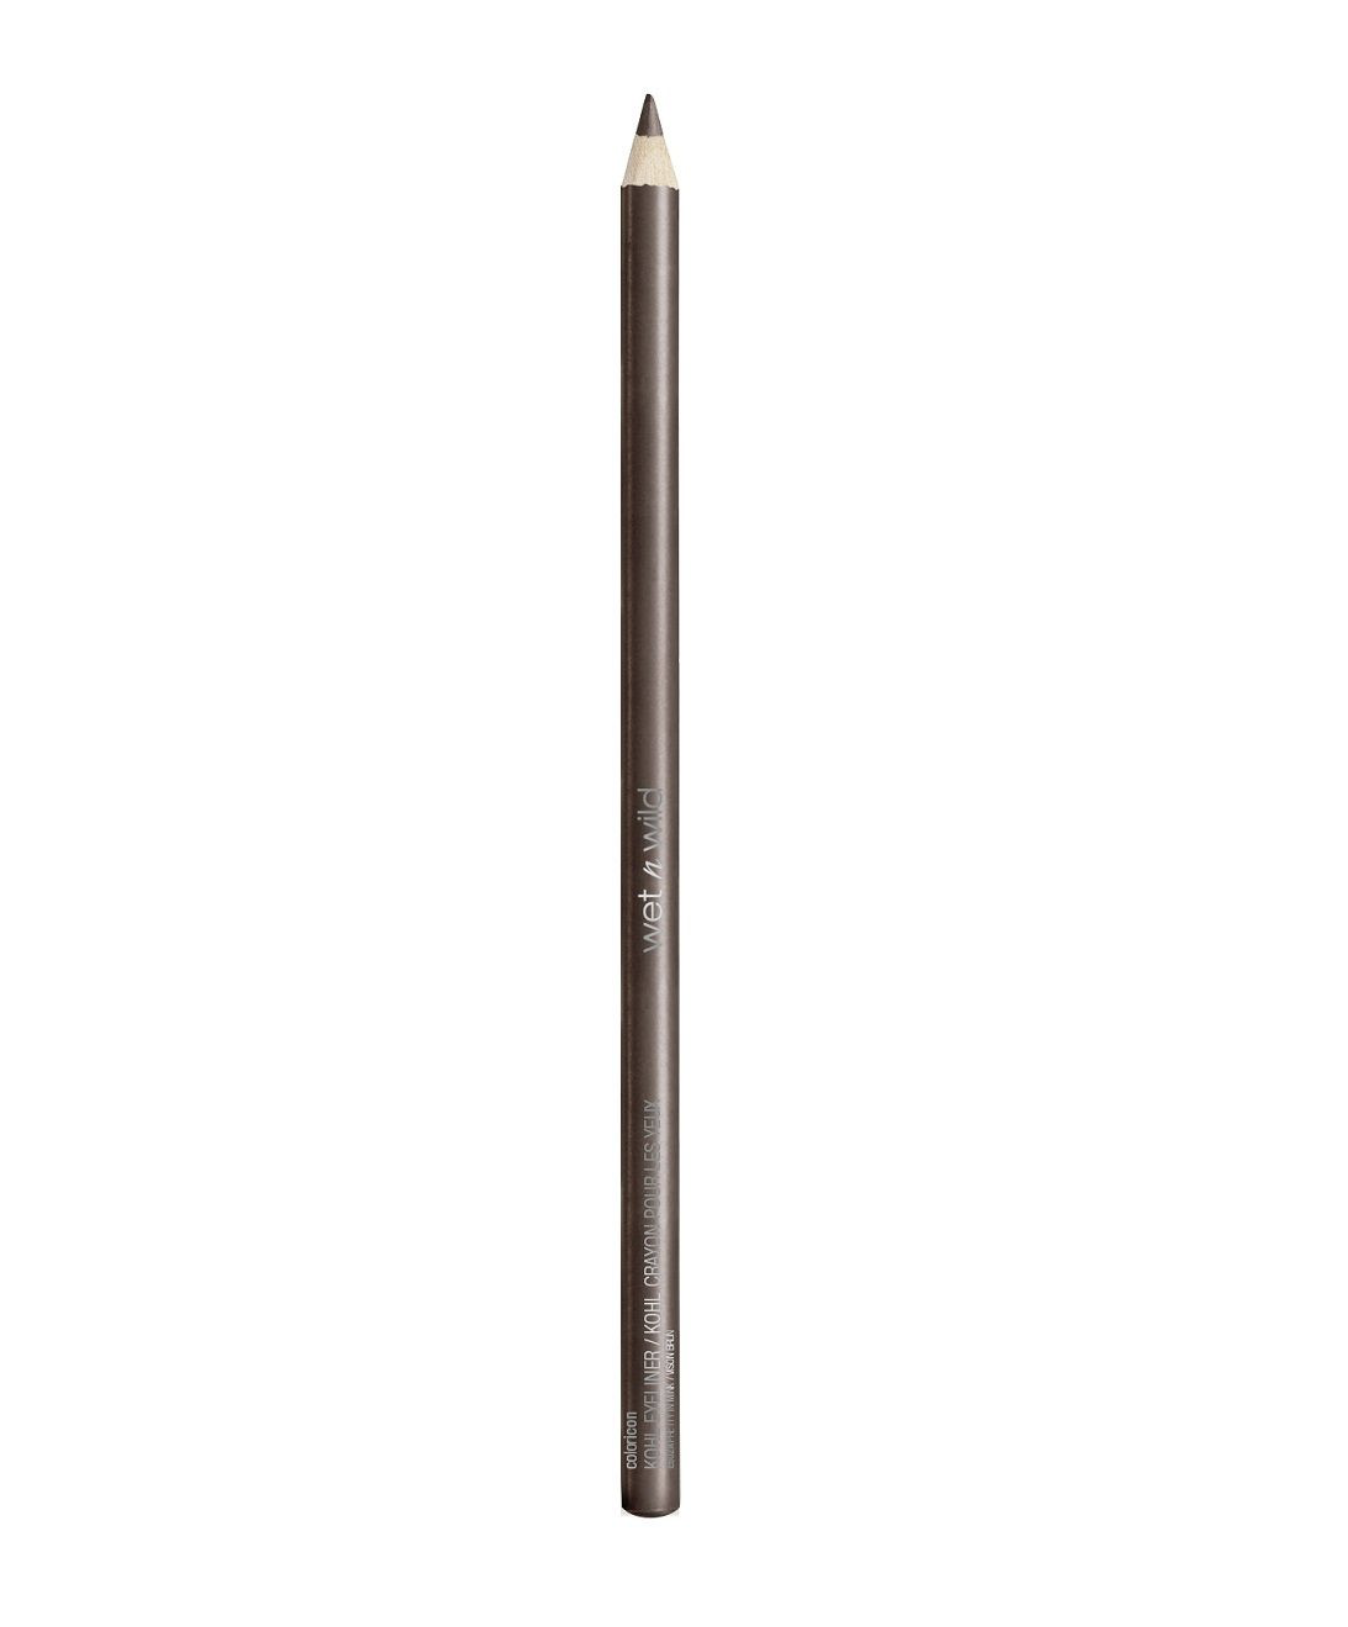     / Wet n Wild    Color Icon Kohl Eyeliner  E602A Pretty in mink 1,4 